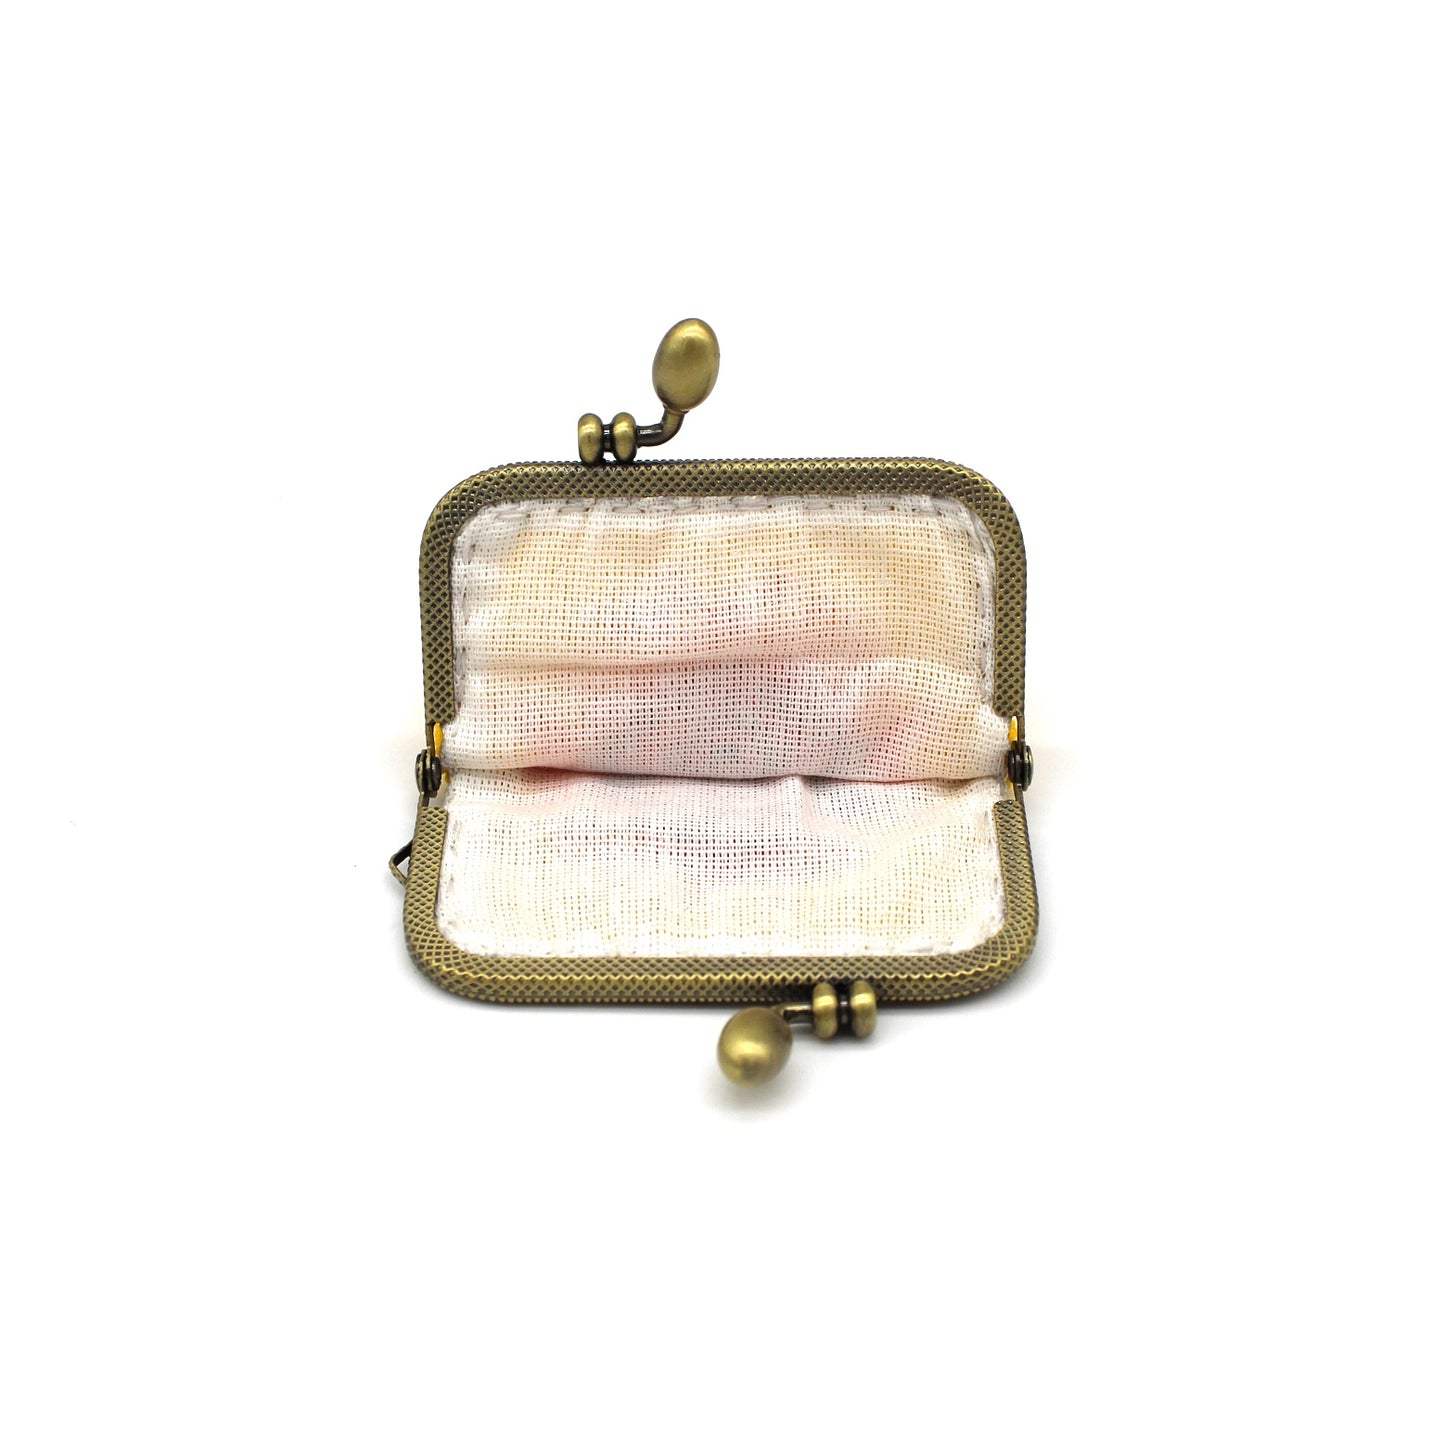 Glass bead coin purse with metal frame - Yellow Eye